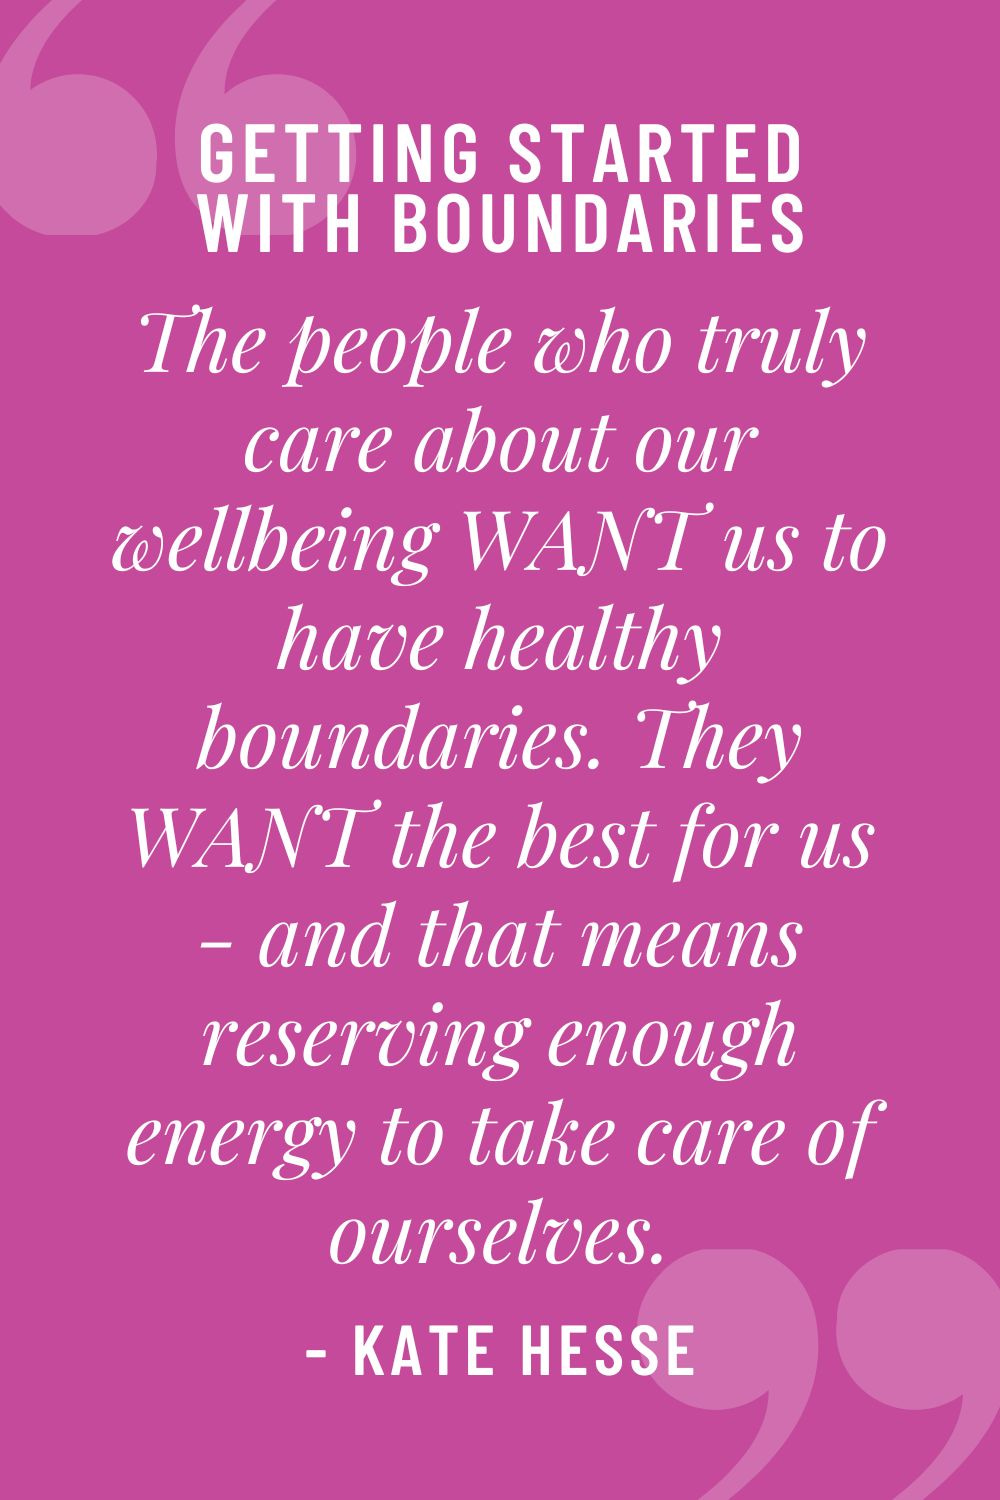 The people who truly care about our wellbeing WANT us to have healthy boundaries.  They WANT the best for us - and that means reserving enough energy to take care of ourselves.